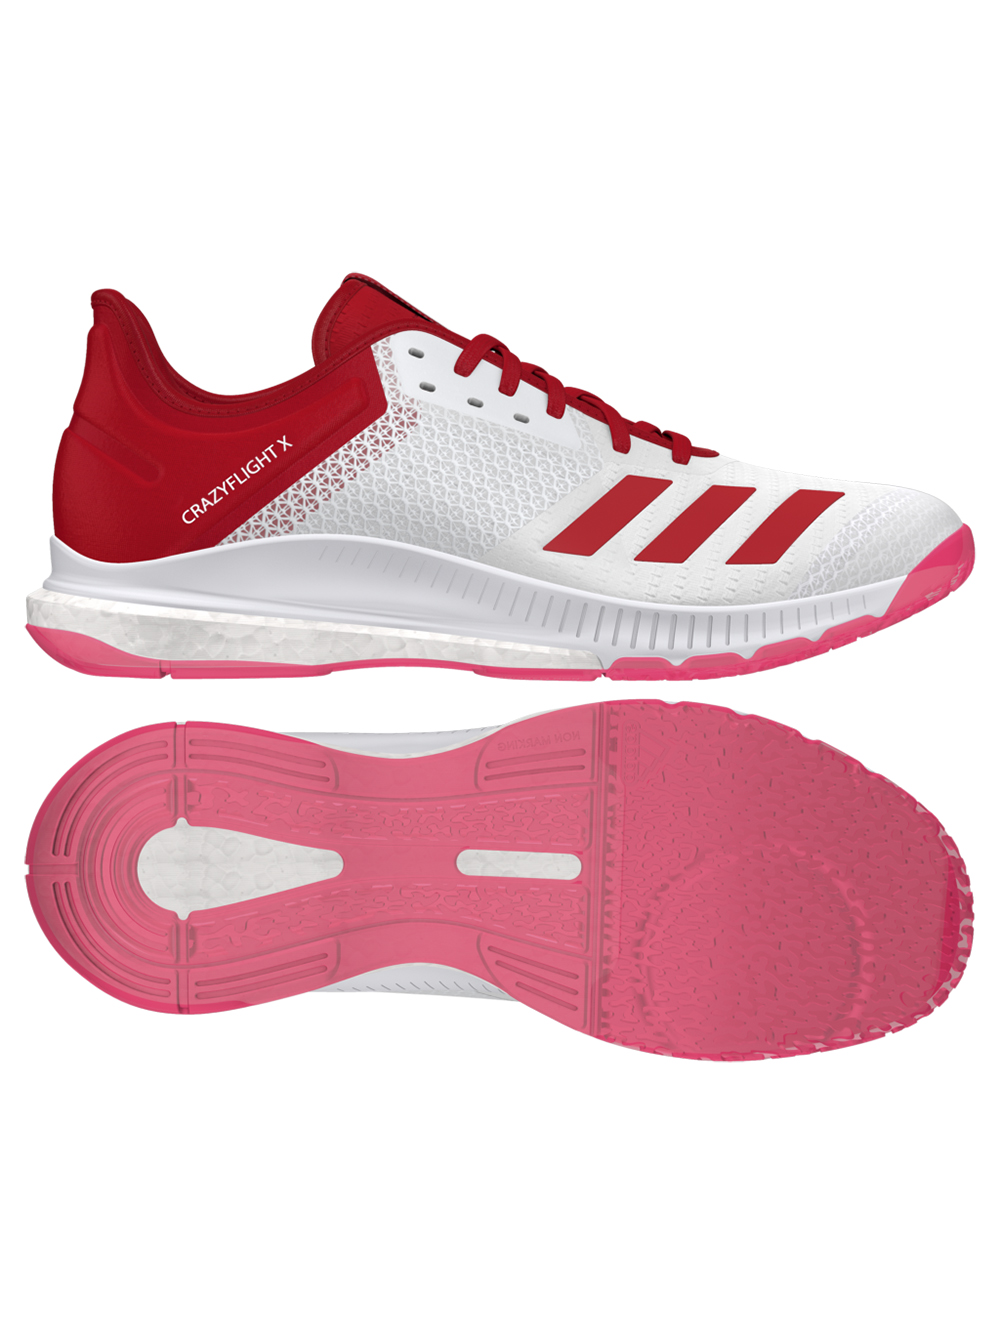 white red adidas shoes